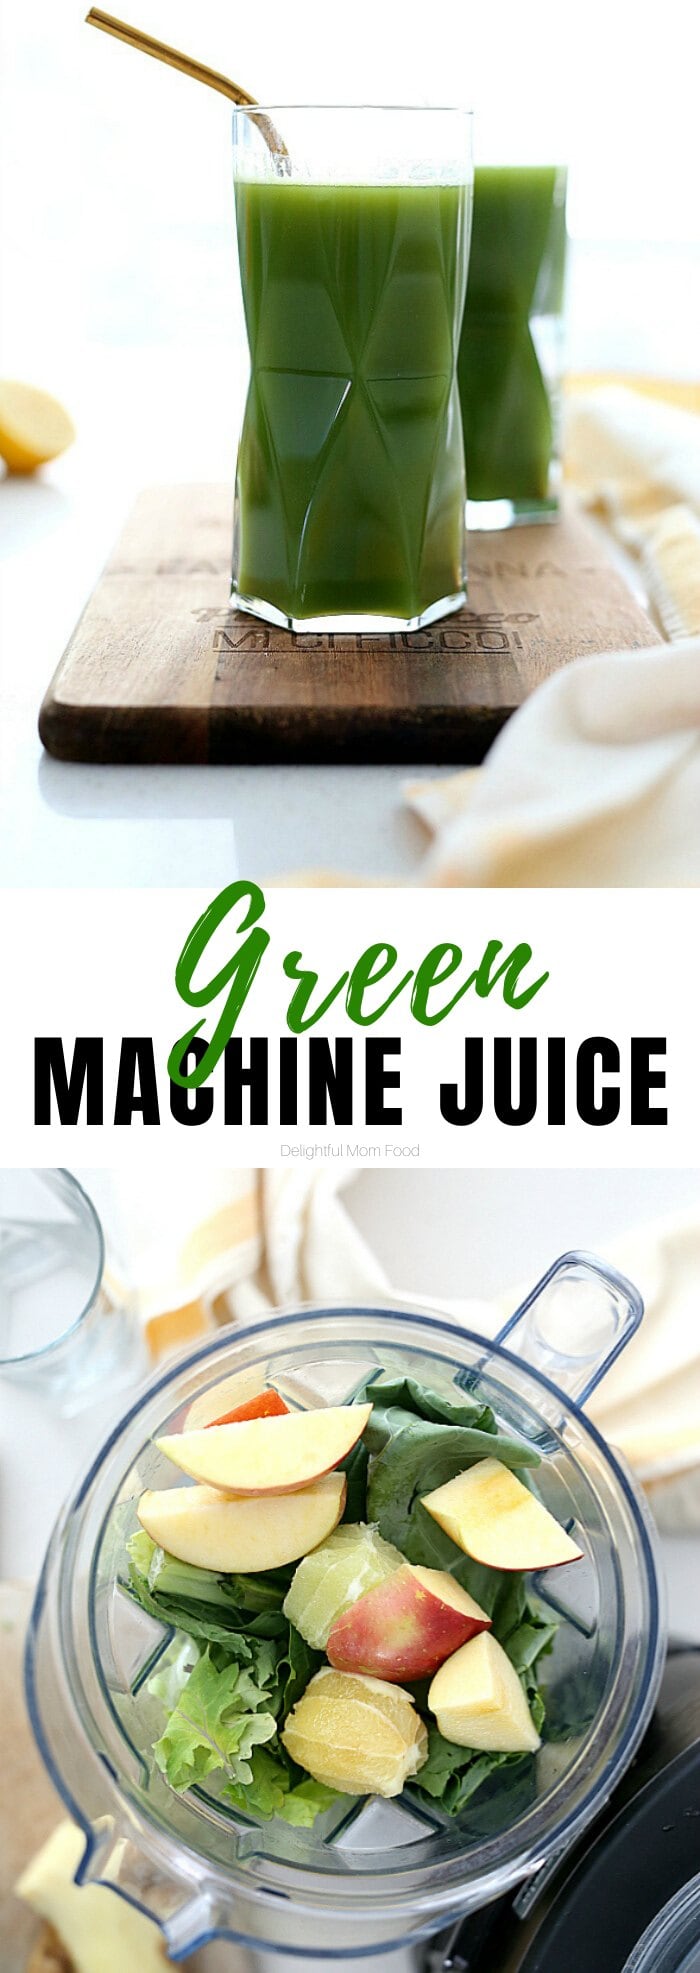 Green machine juice to help reset your body, detox, and pump you full of vital nutrients to instantly increase energy and gut health! This green drink is delicious, refreshing, and simple to make in both a juicer or blender. #greenmachinejuice #green #juice #detox #drinks #beverage #wellness #healthy #glutenfree #cleanse #recipe | Delightful Mom Food